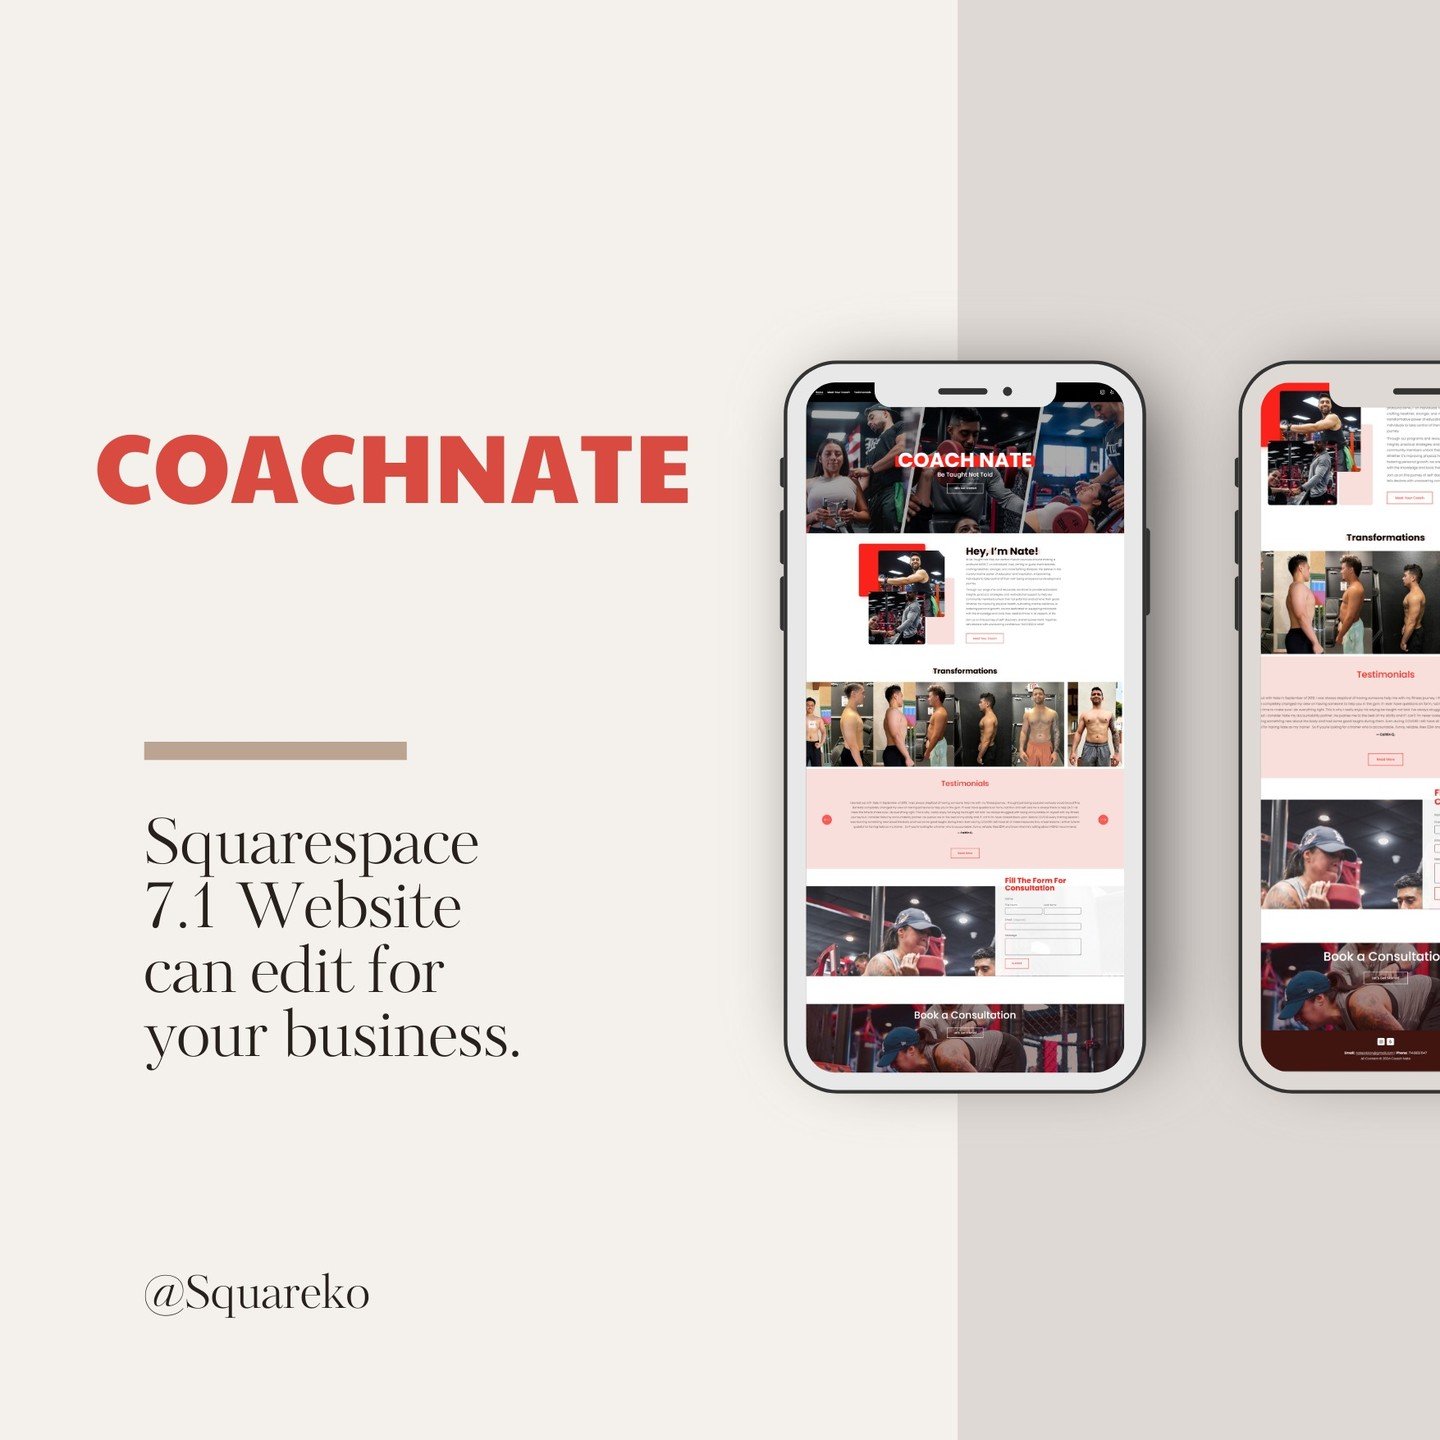 Our customers love how they can personalize our top-notch Squarespace templates to craft stunning and functional websites for their businesses. With Squarespace templates, creating remarkable websites is both fast and budget-friendly.
#squarespacedes